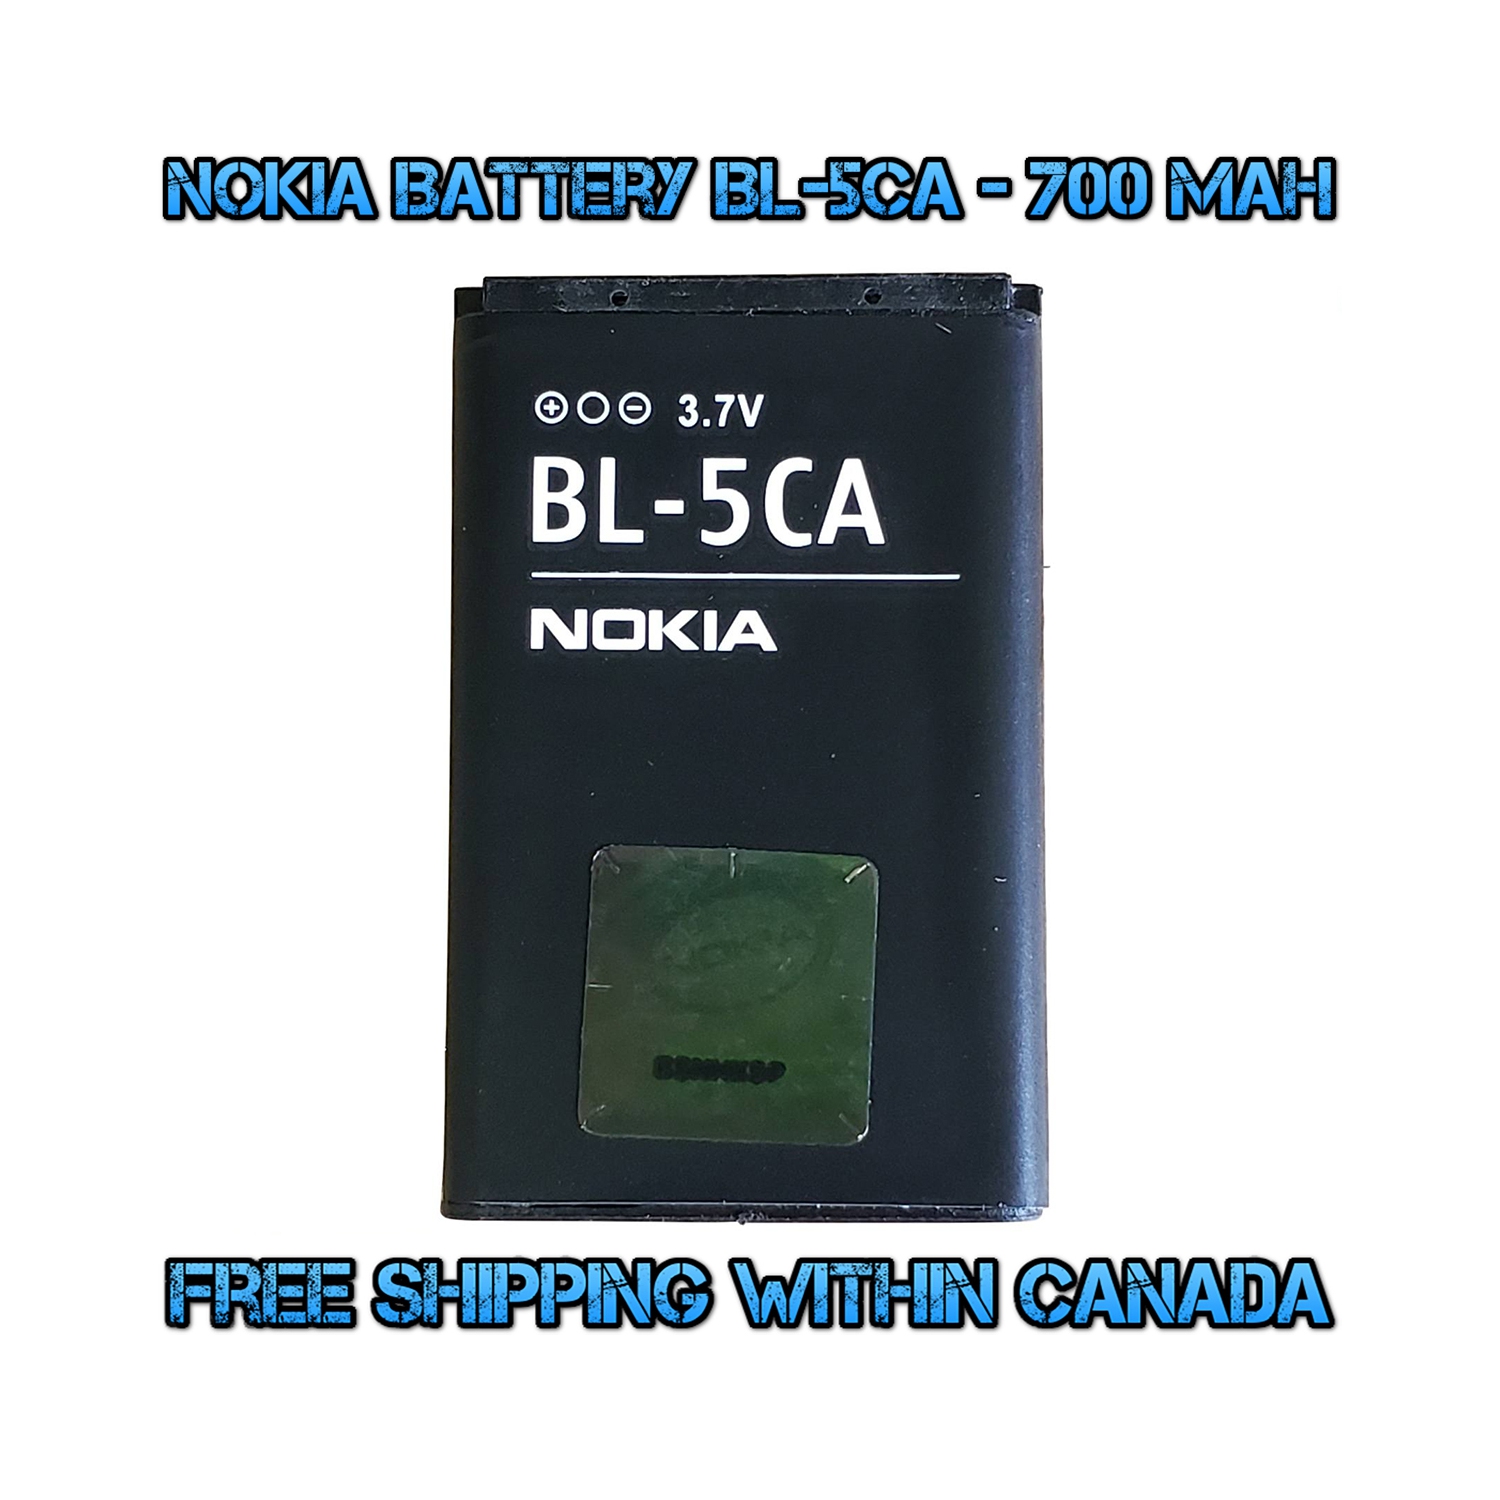 New OEM Replacement Battery Model BL-5CA 700 mAh for Nokia 1112 1116 1200 1208 1208b 1209 1680 1681 1682 2322 - (FREE SHIPPING)